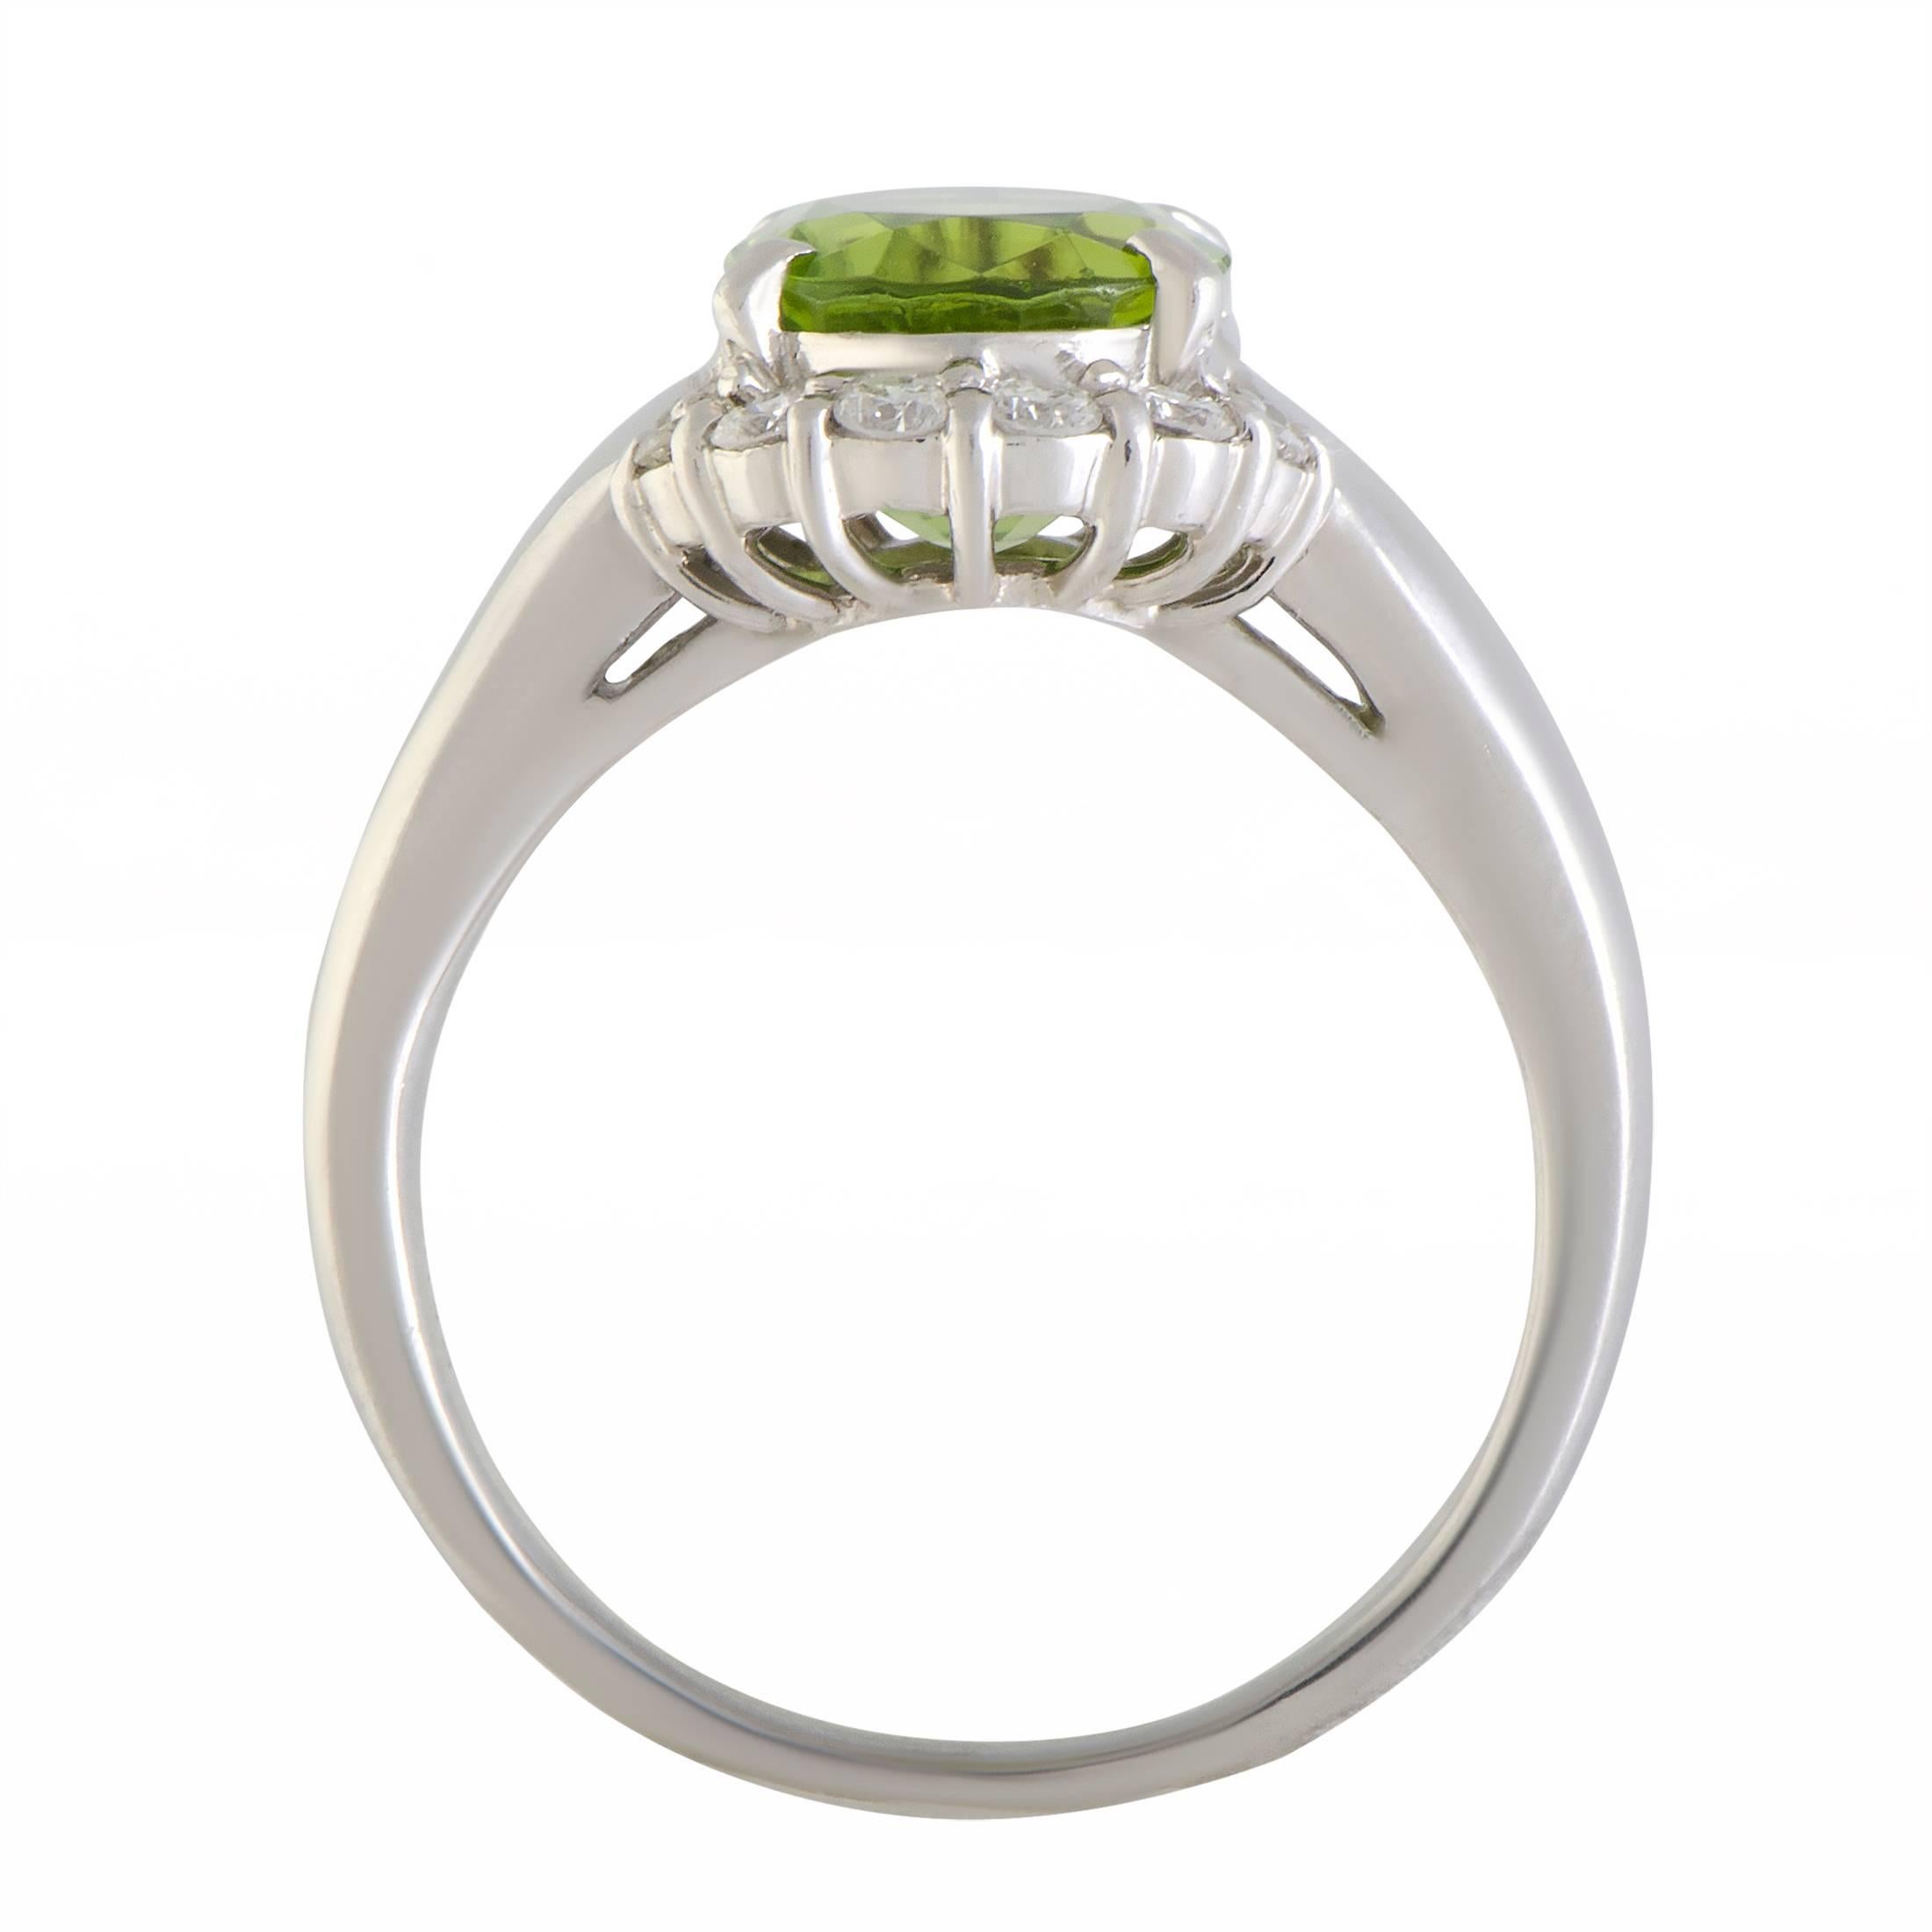 The splendid peridot is accompanied by glistening diamonds and gives an exceptionally prestigious appeal to this classy ring. The ring is made of platinum and weighs 12.5 grams, and the diamond stones total 0.41 carats.
Ring Size 9
Band 4mm 
Top